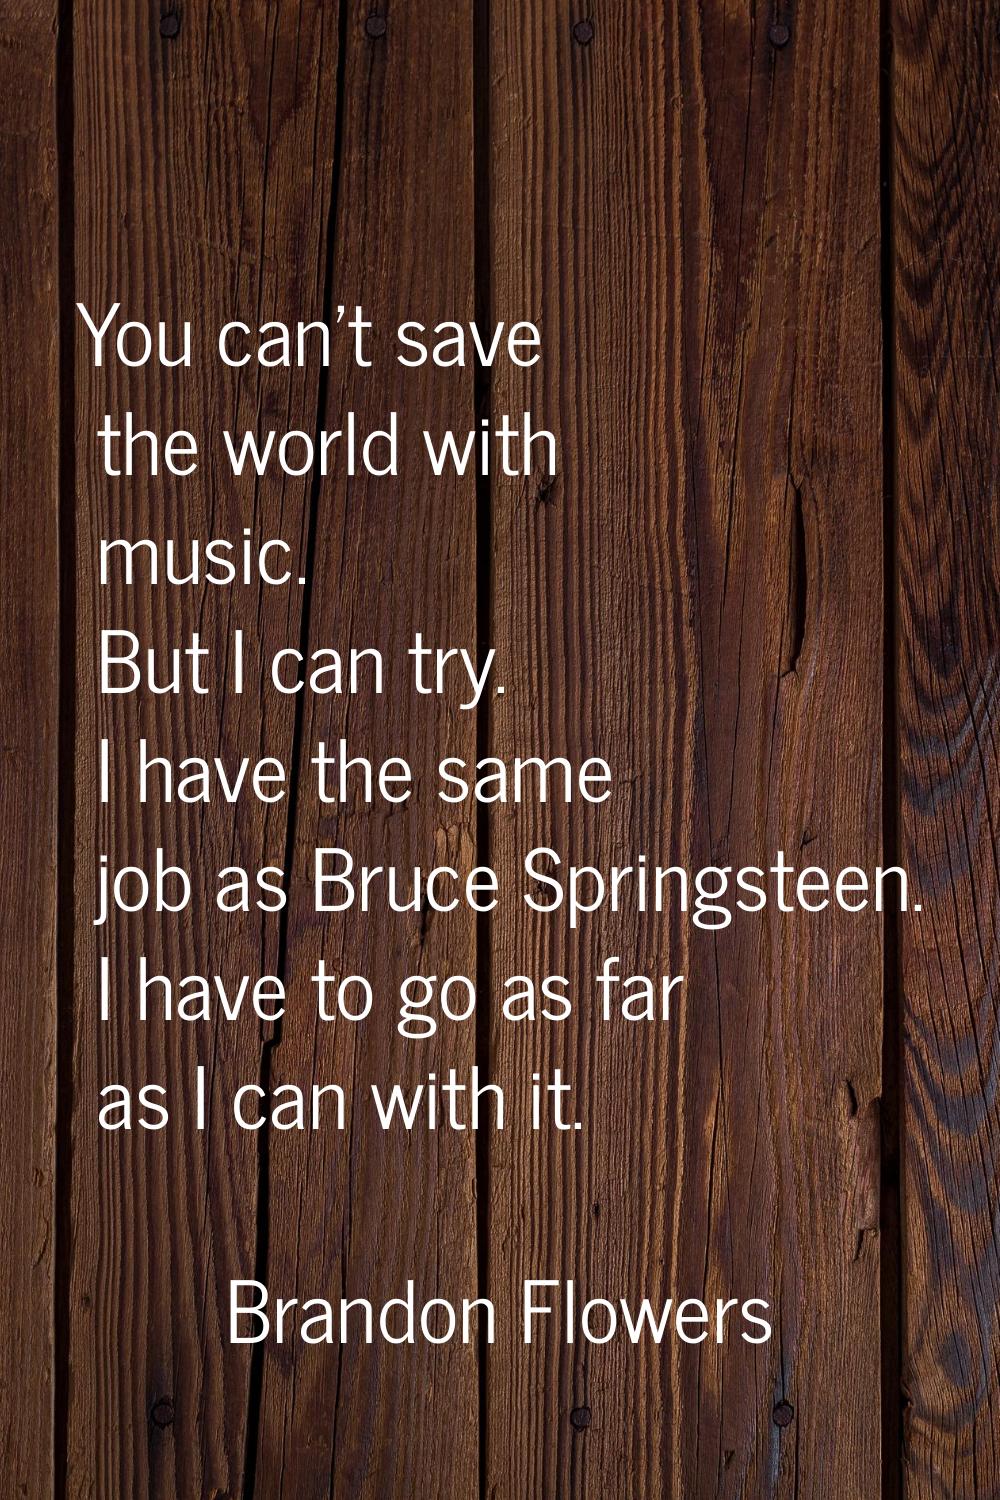 You can't save the world with music. But I can try. I have the same job as Bruce Springsteen. I hav